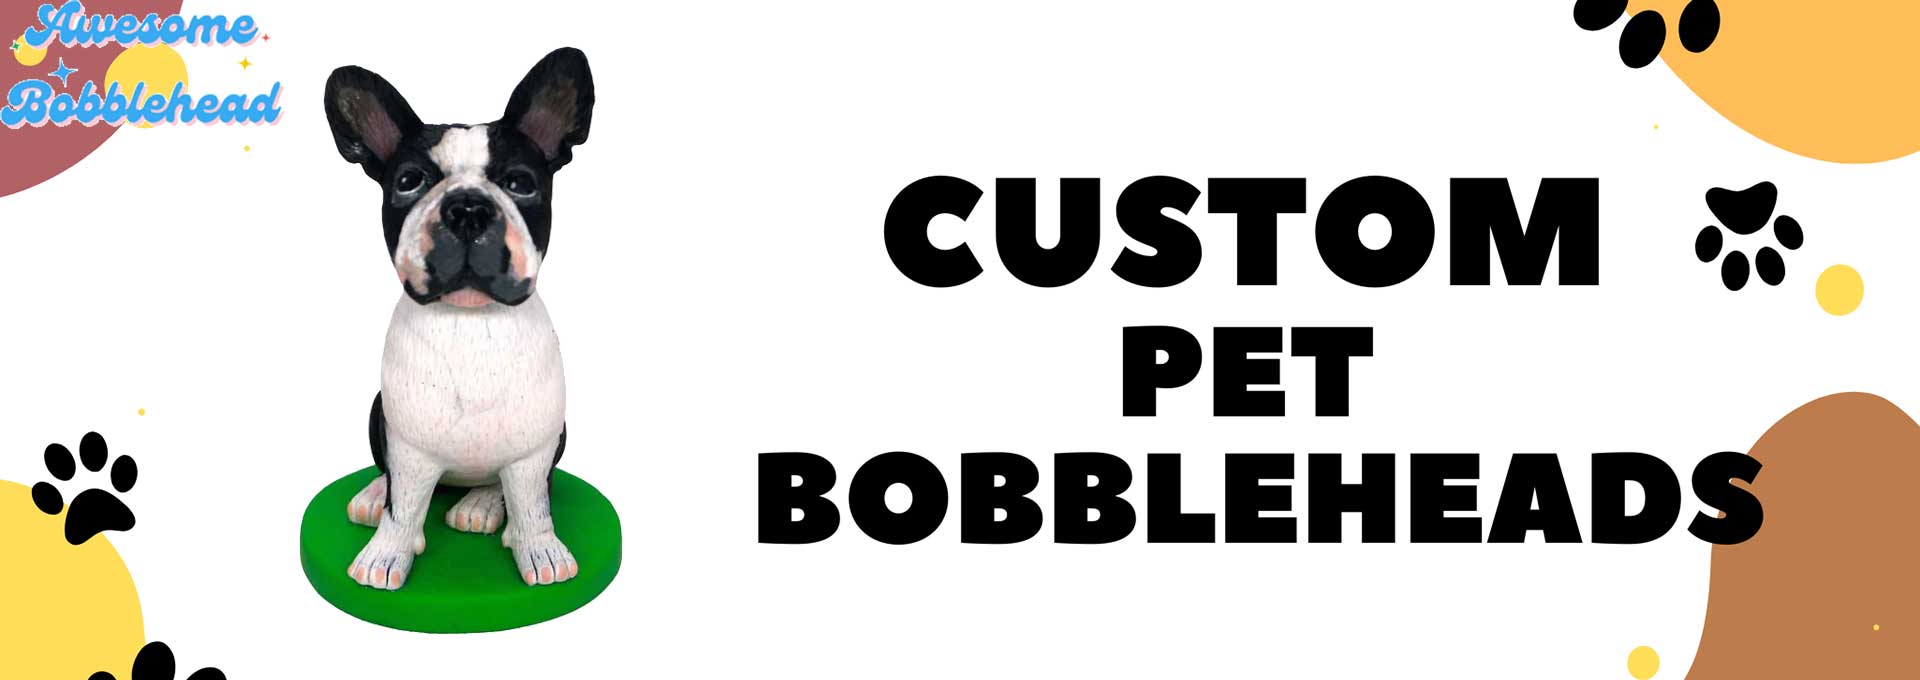 How To Custom Pet Bobbleheads From Photo?